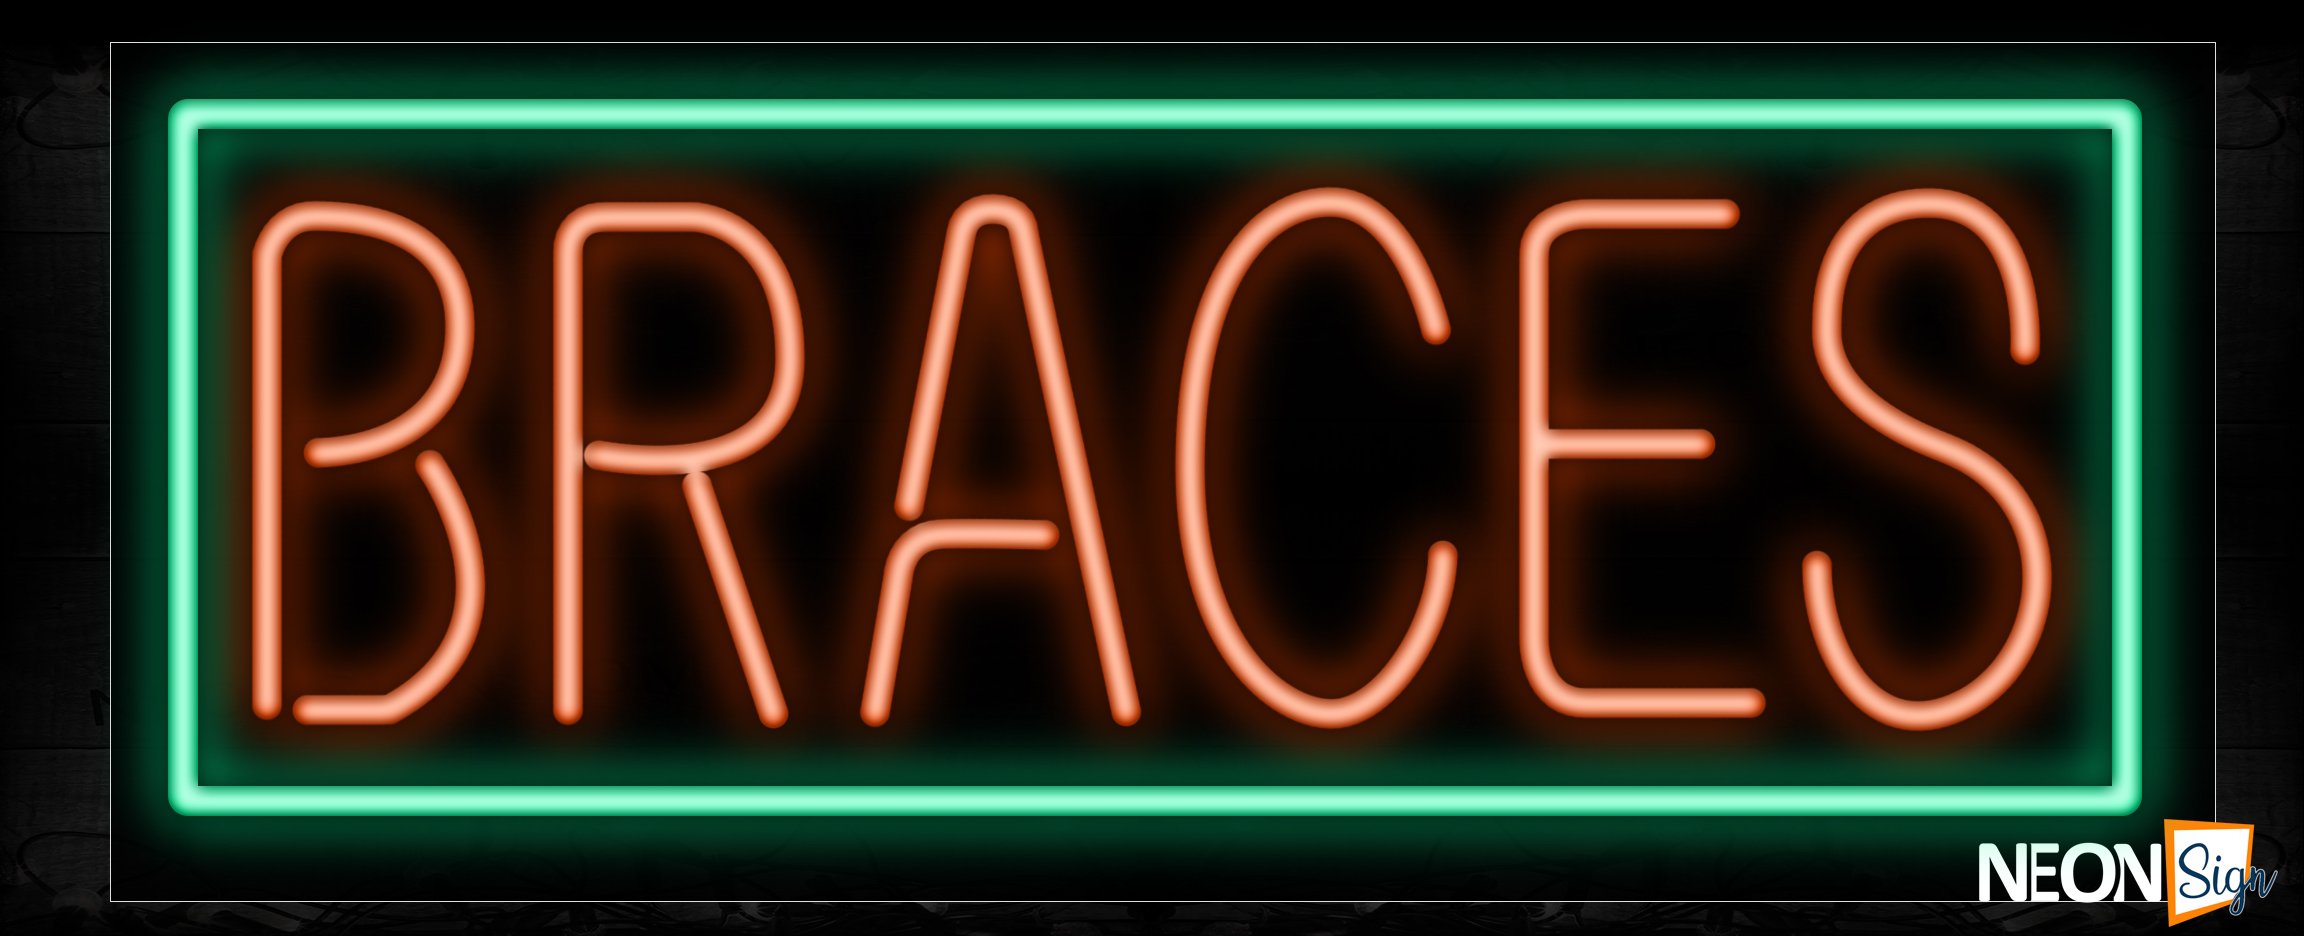 Image of 10500 Braces wtih green border Neon Sign_13x32 Black Backing